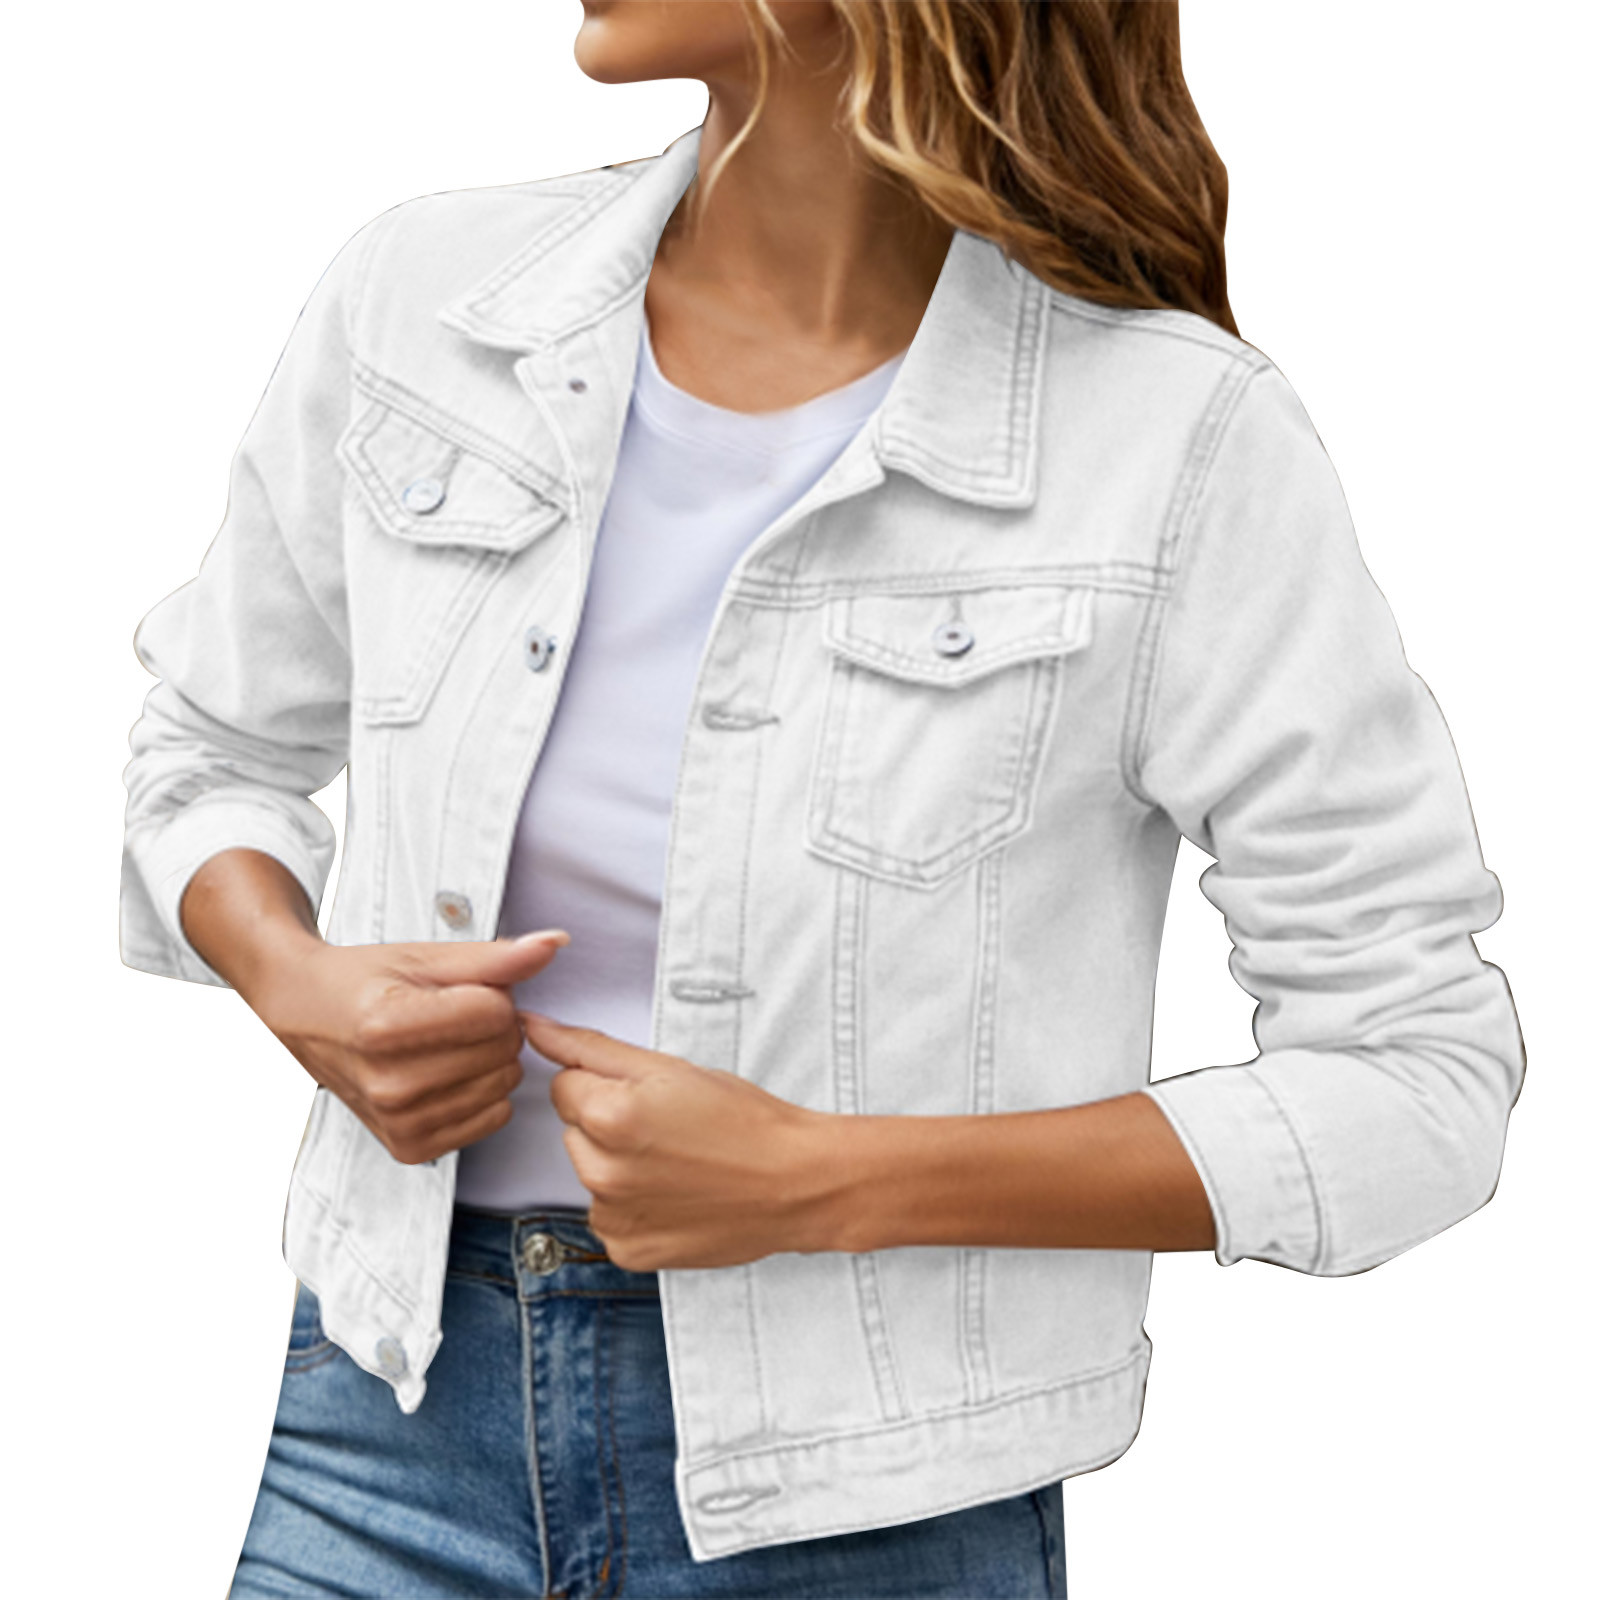 iOPQO womens sweaters Women's Basic Solid Color Button Down Denim Cotton Jacket With Pockets Denim Jacket Coat Women's Denim Jackets White XL - image 1 of 8